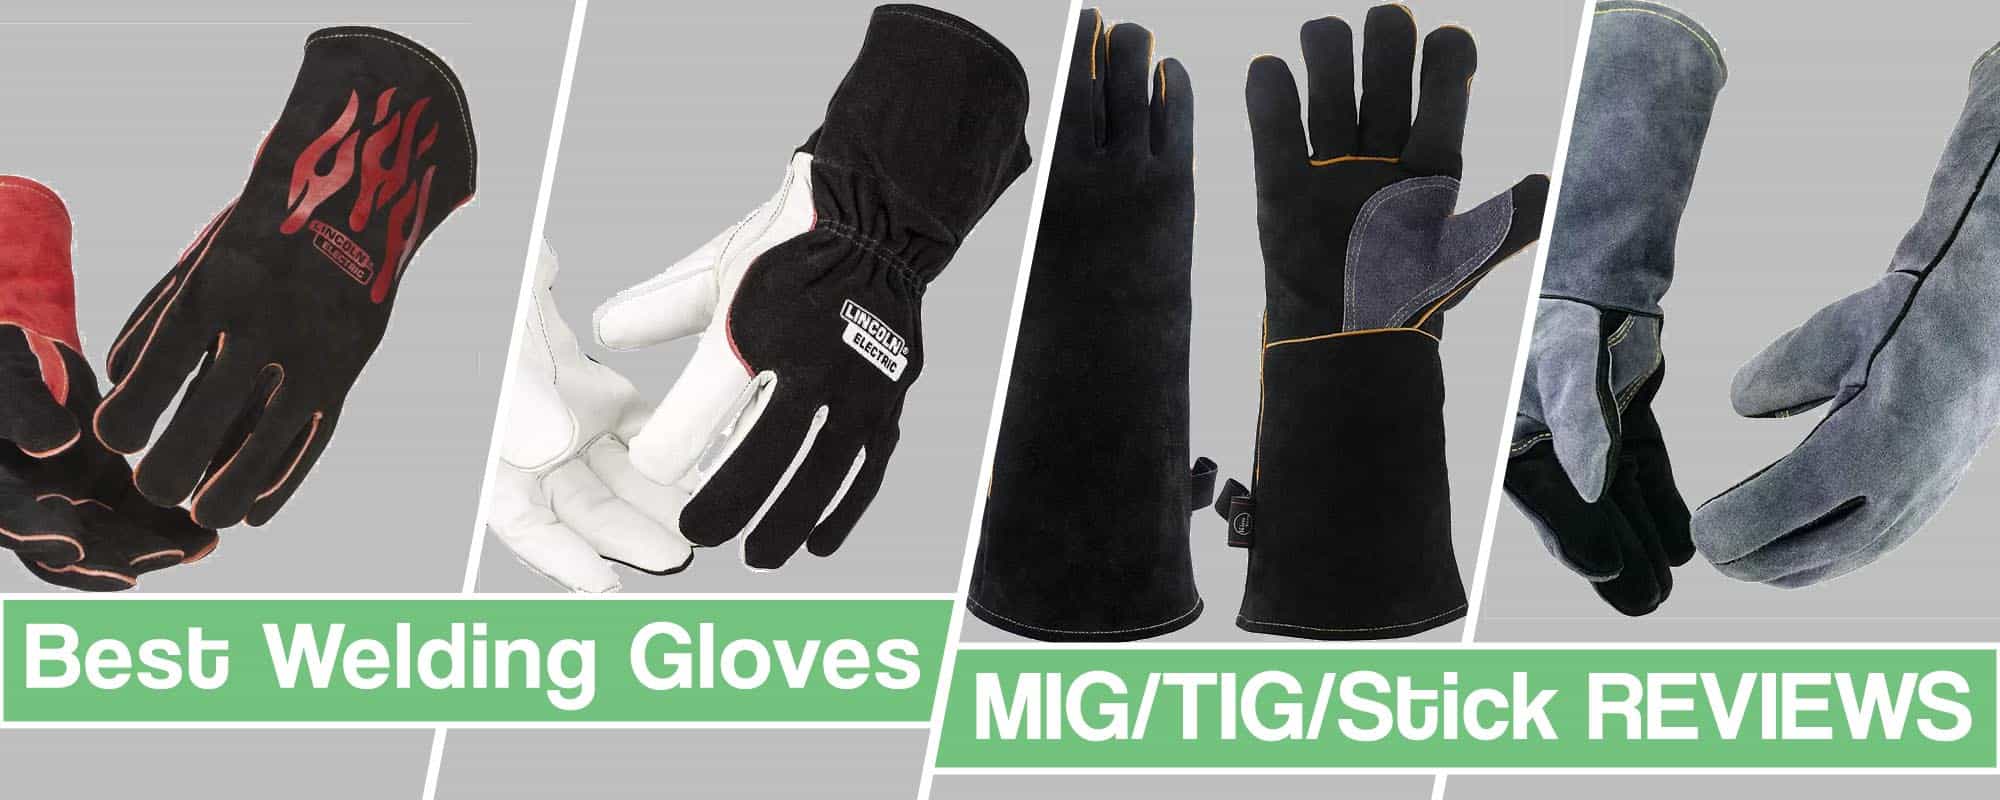 Best Welding Gloves Reviews For MIG, Stick and Flux Core from High-Quality Leather [2022]